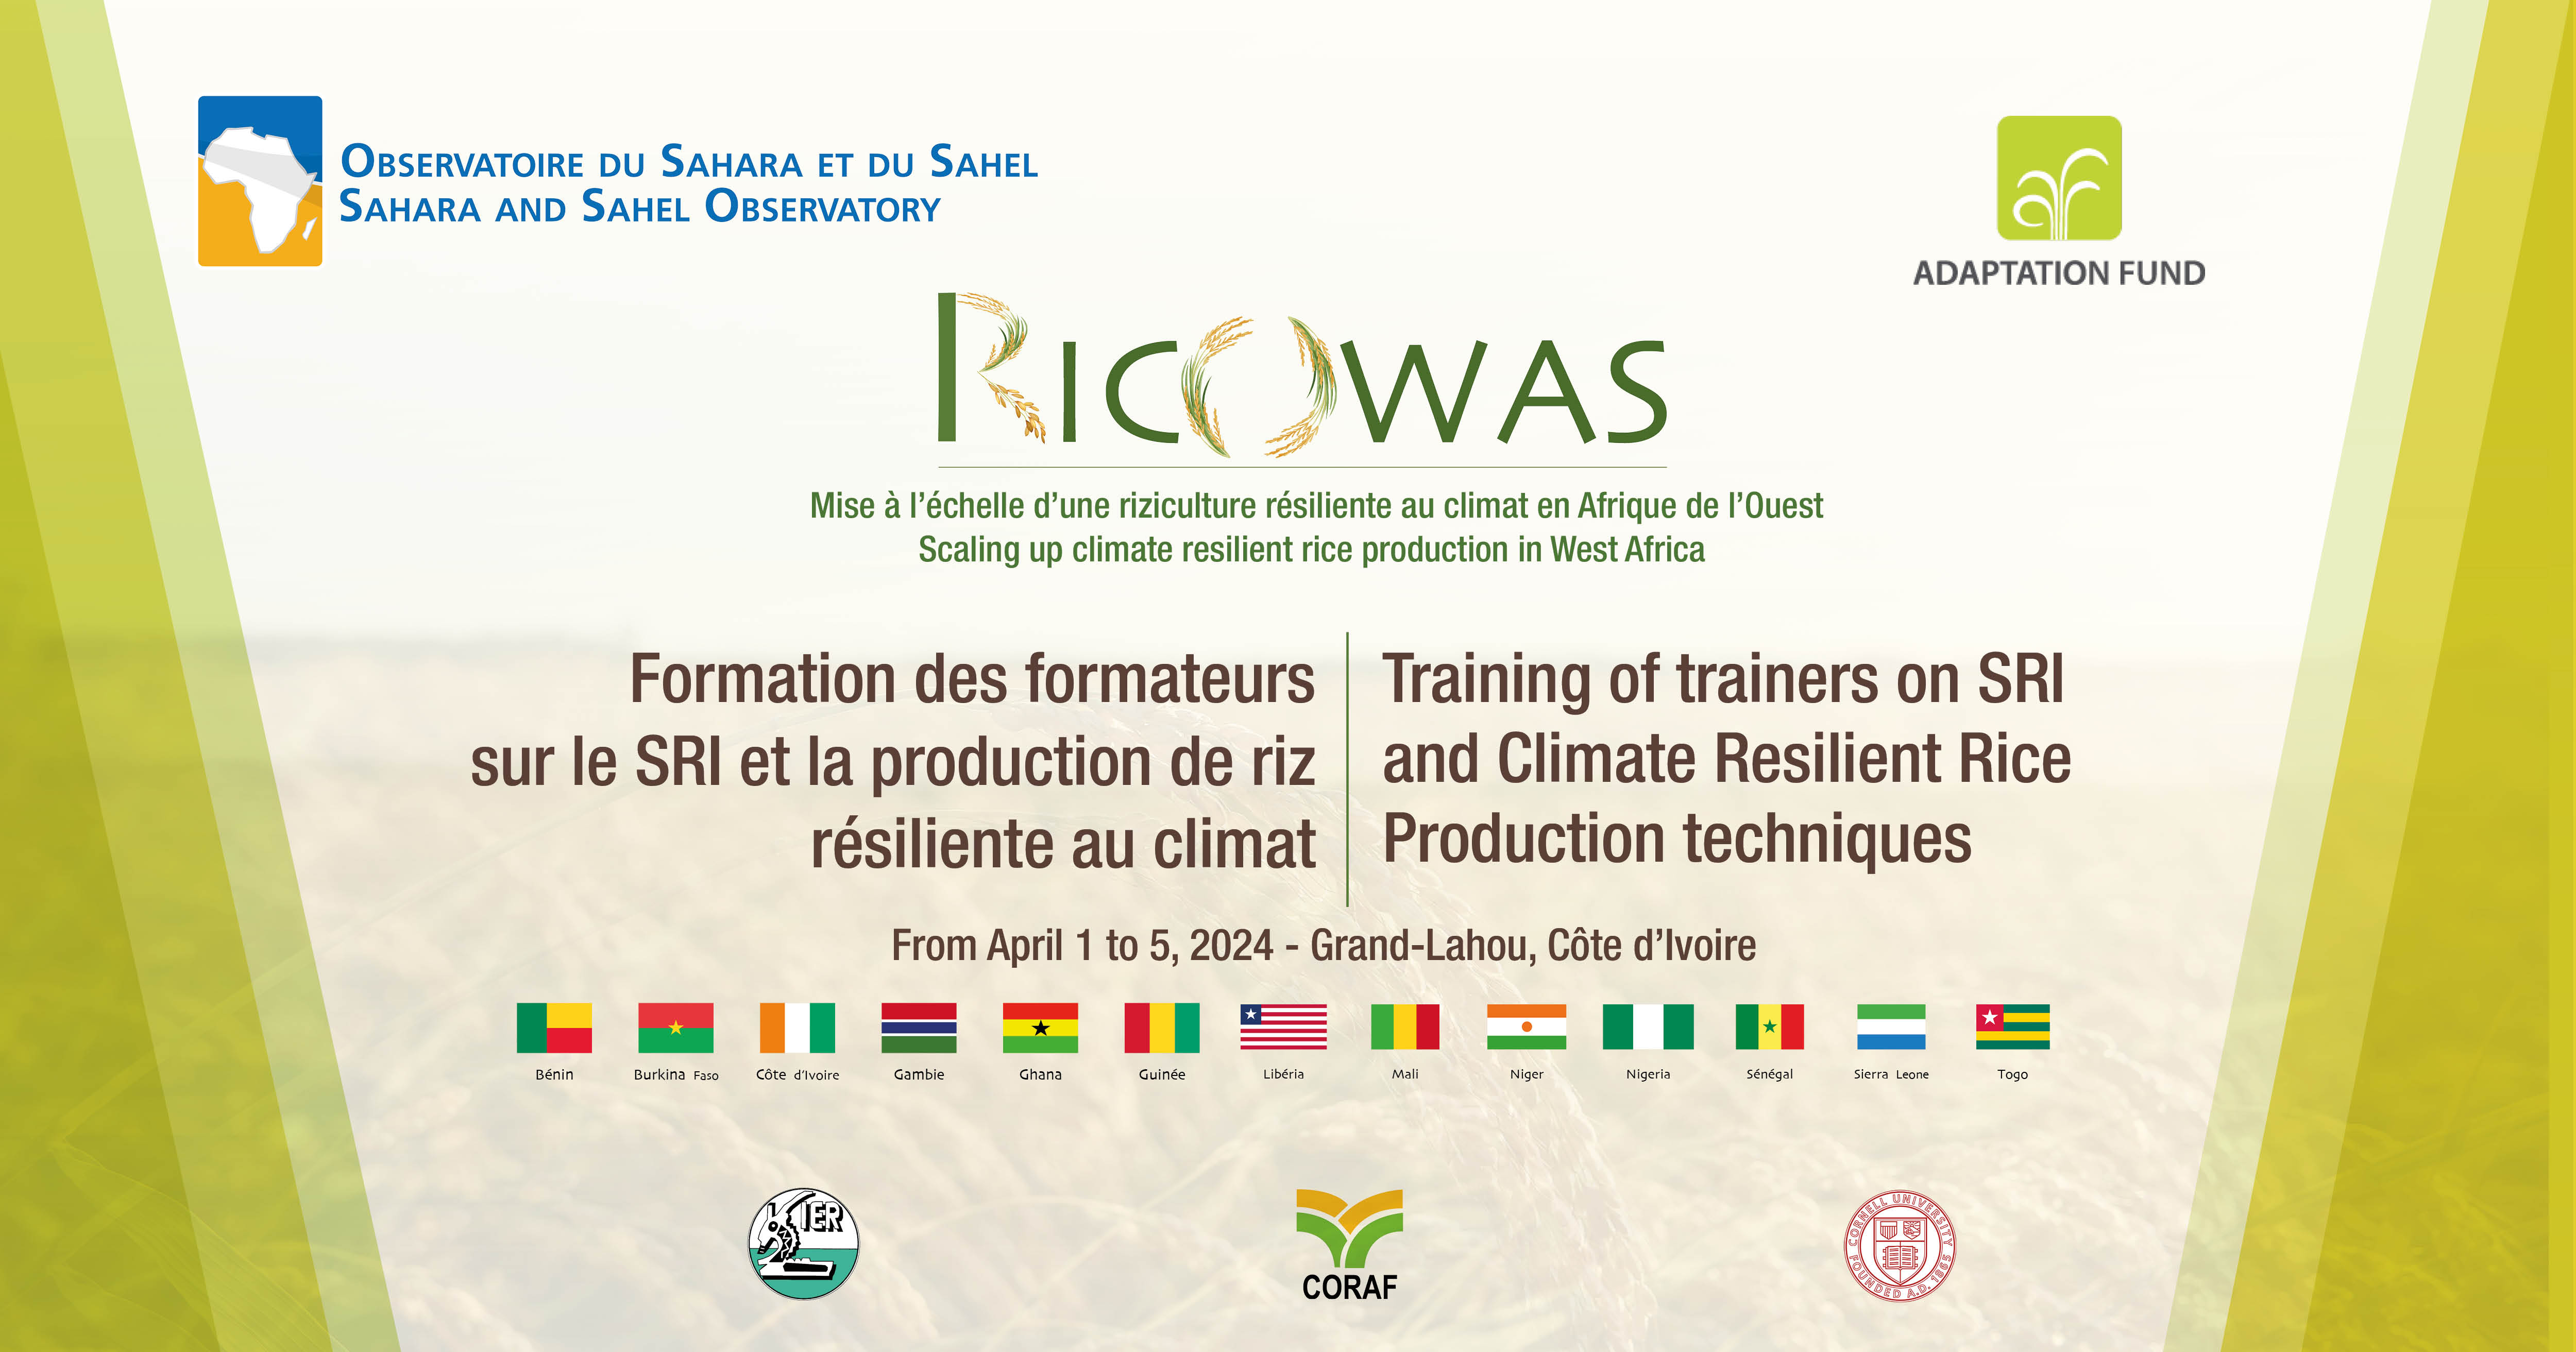  training of trainers workshop will be held from April 1 to 5, 2024, Grand Lahou, Cote d'Ivoire